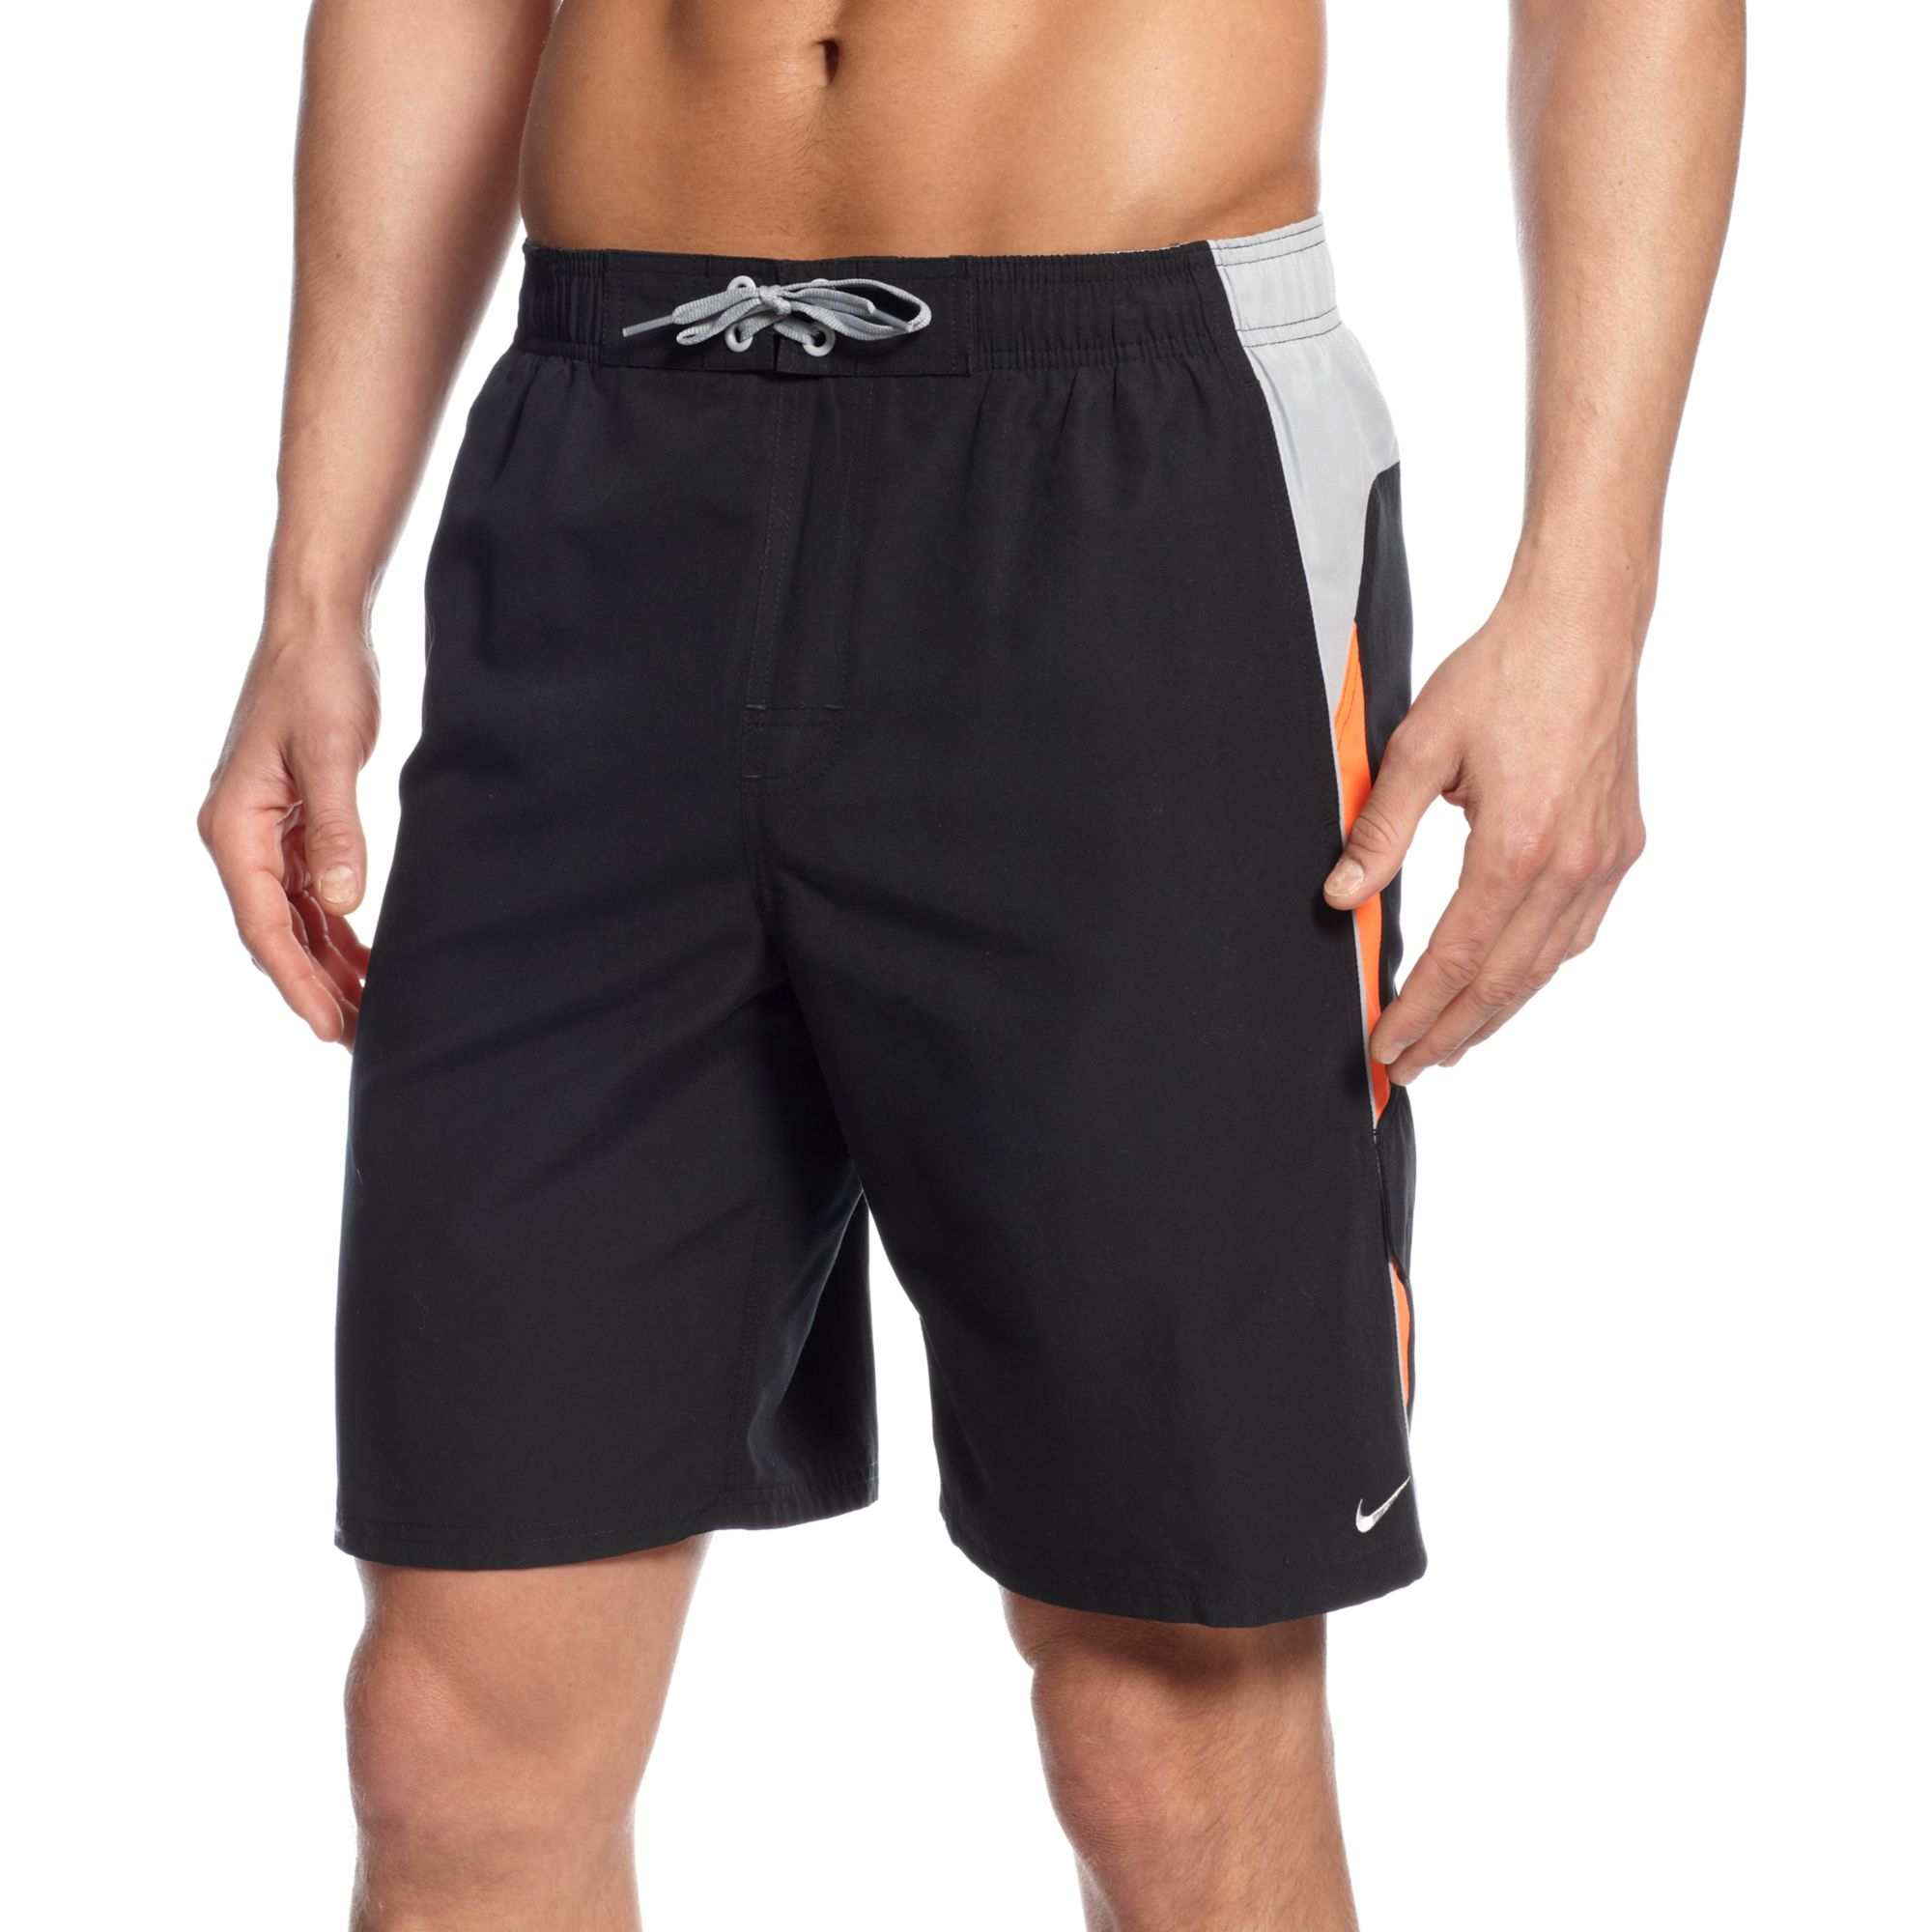 Lyst - Nike Core Colorblocked 9 Volley Boardshorts in Black for Men